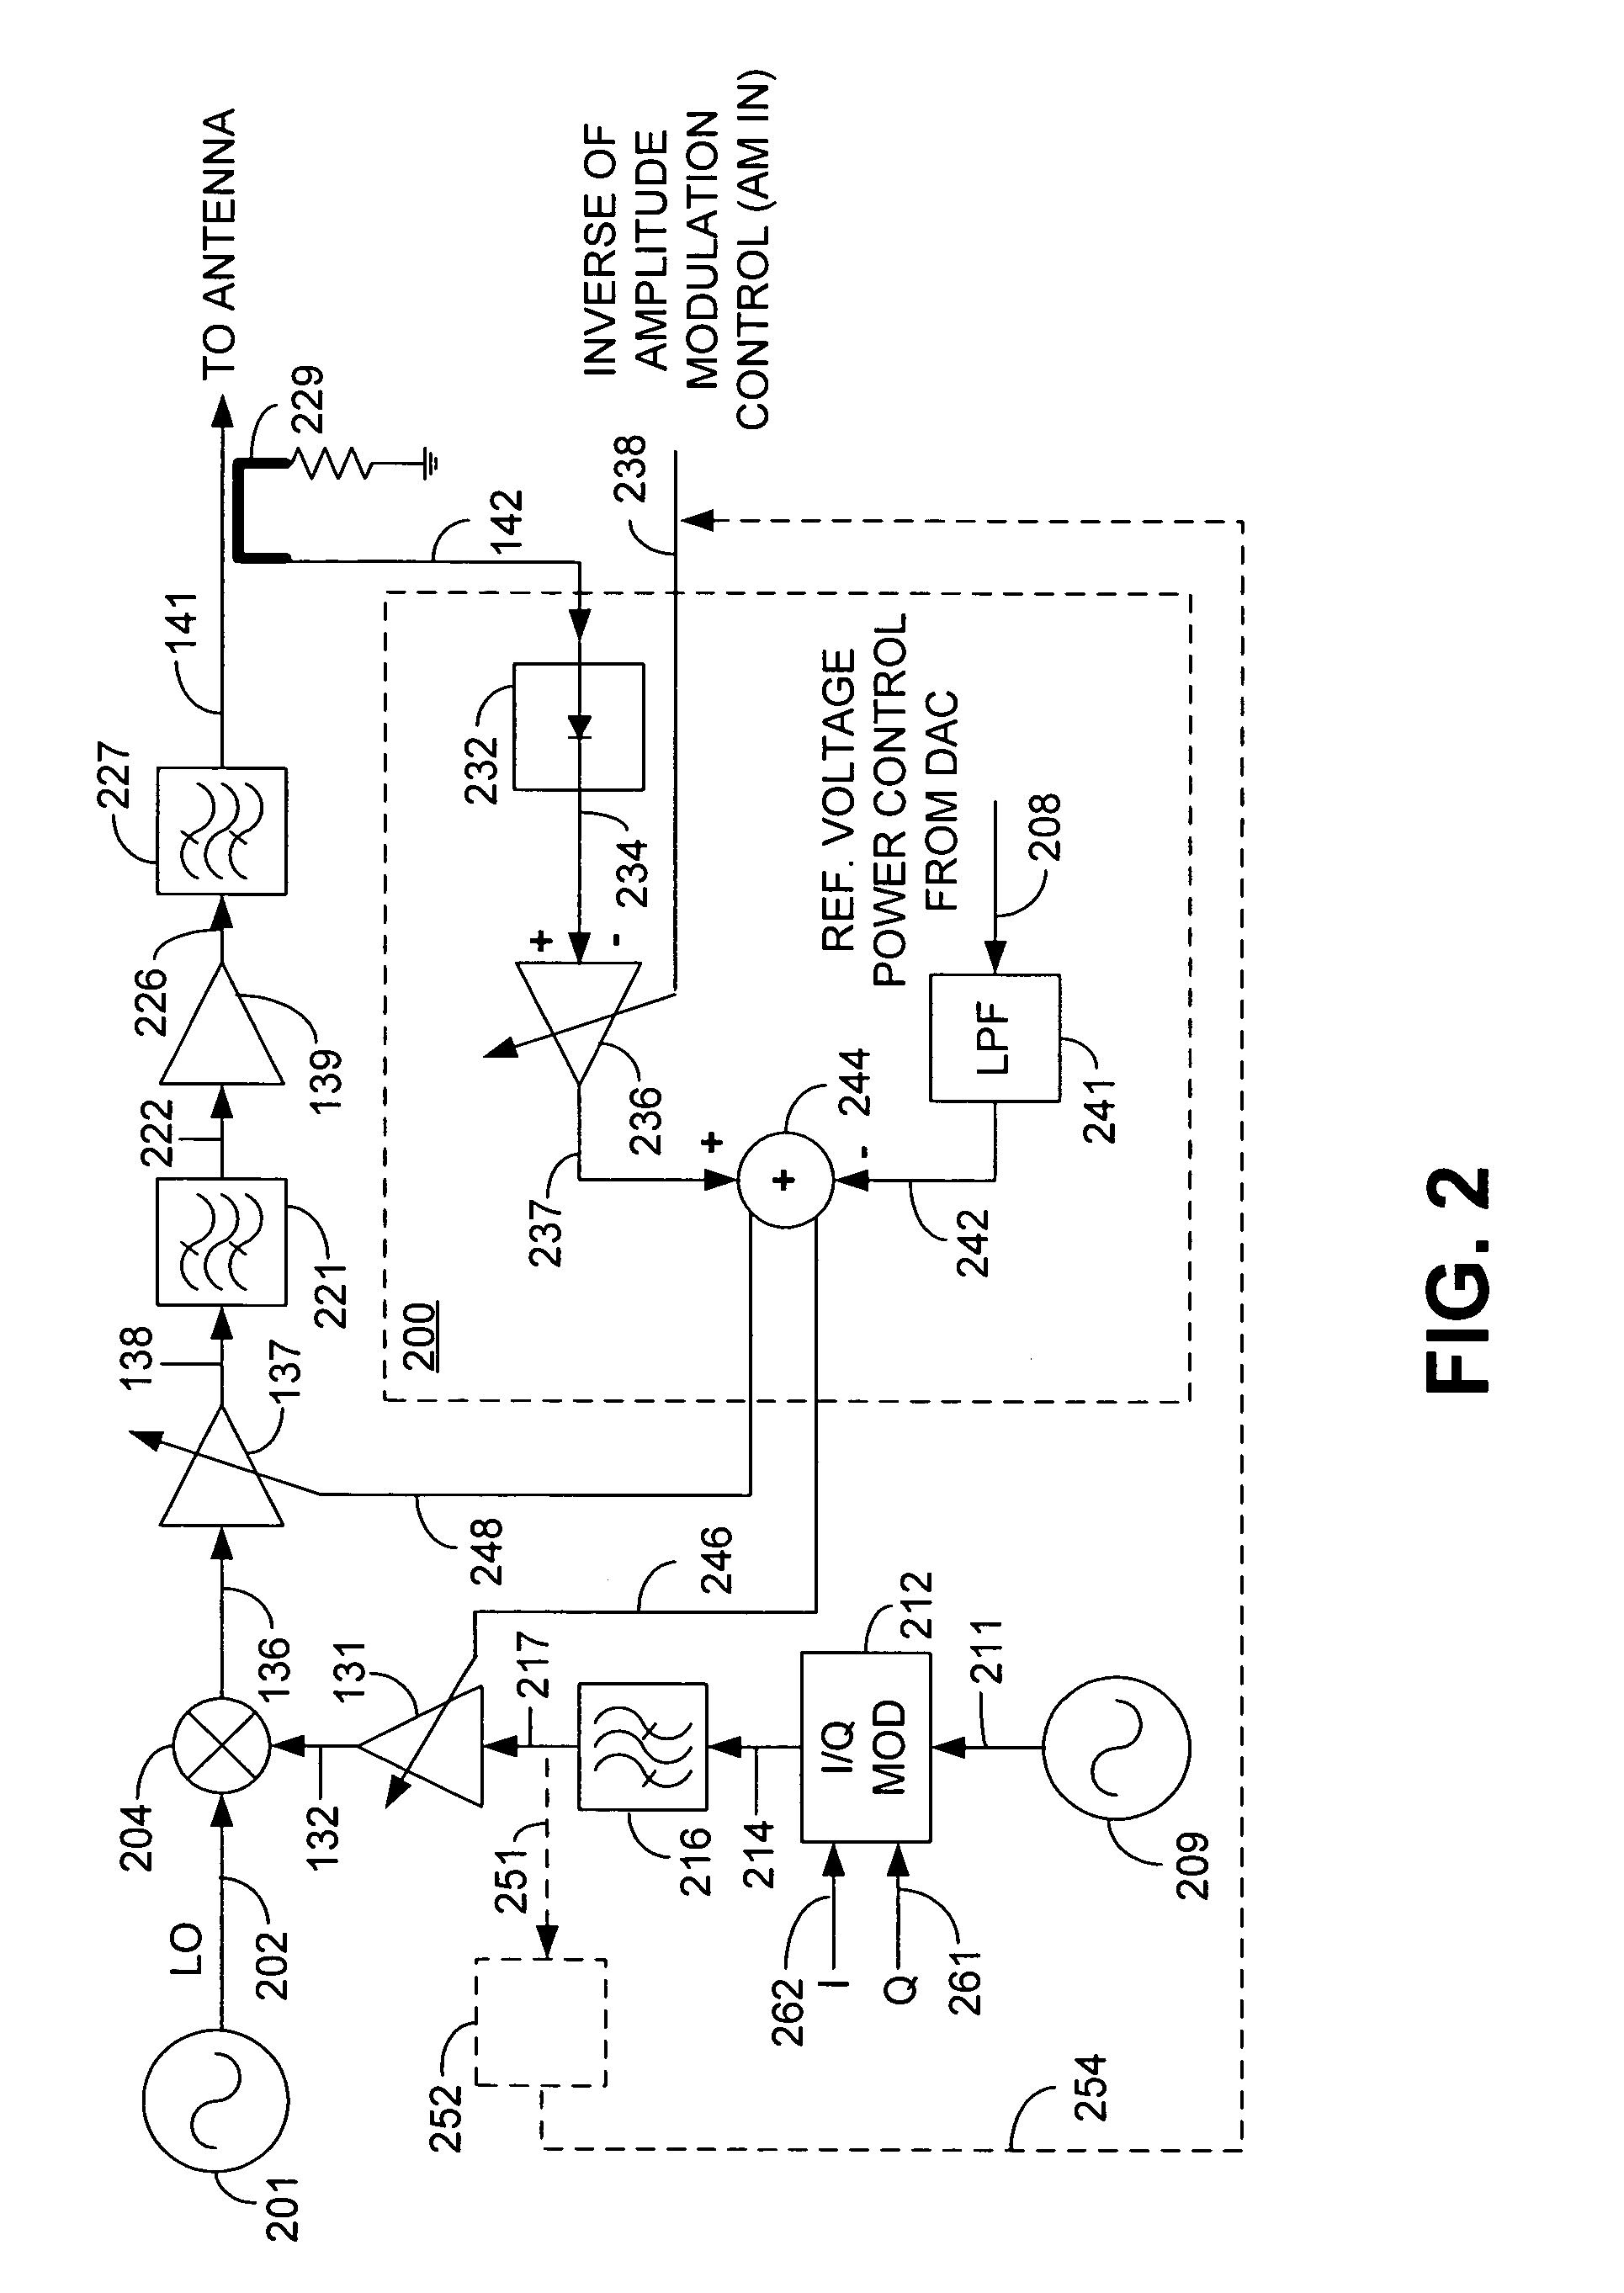 System and method for allowing a TDMA/CDMA portable transceiver to operate with closed loop power control